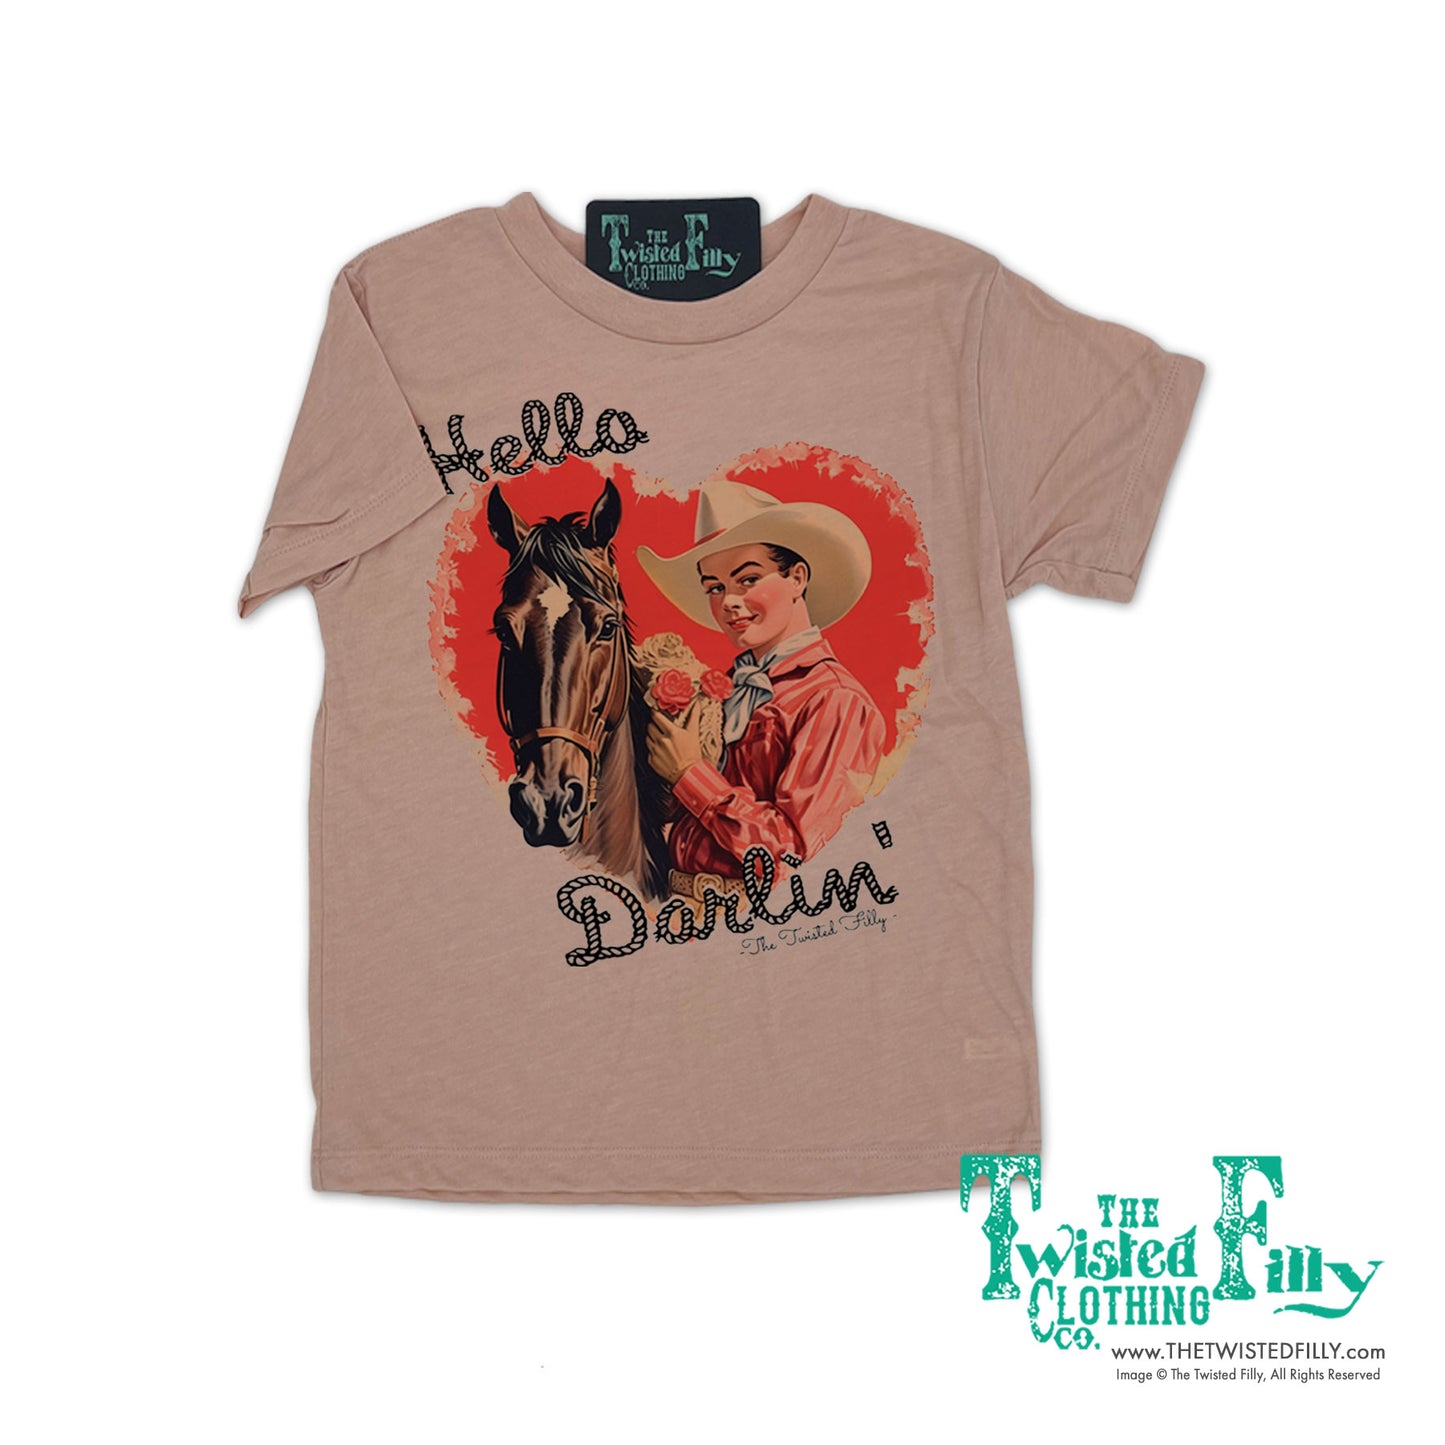 Hello Darlin' - S/S Toddler Tee - Assorted Colors